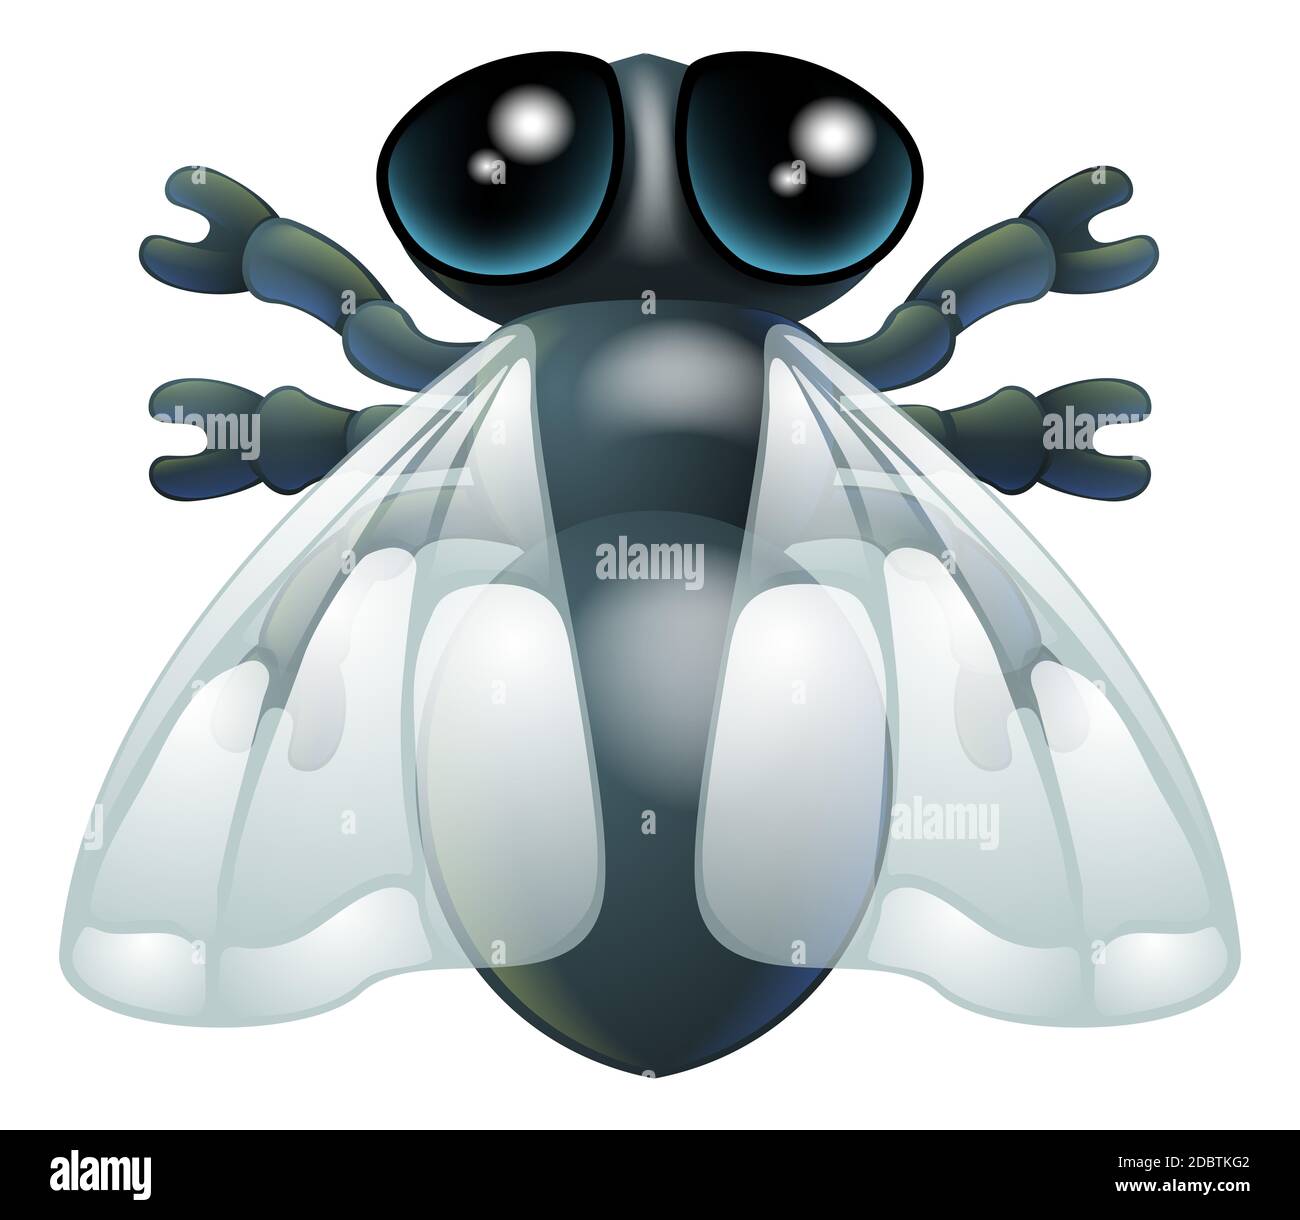 An illustration of a cartoon fly bug character Stock Photo